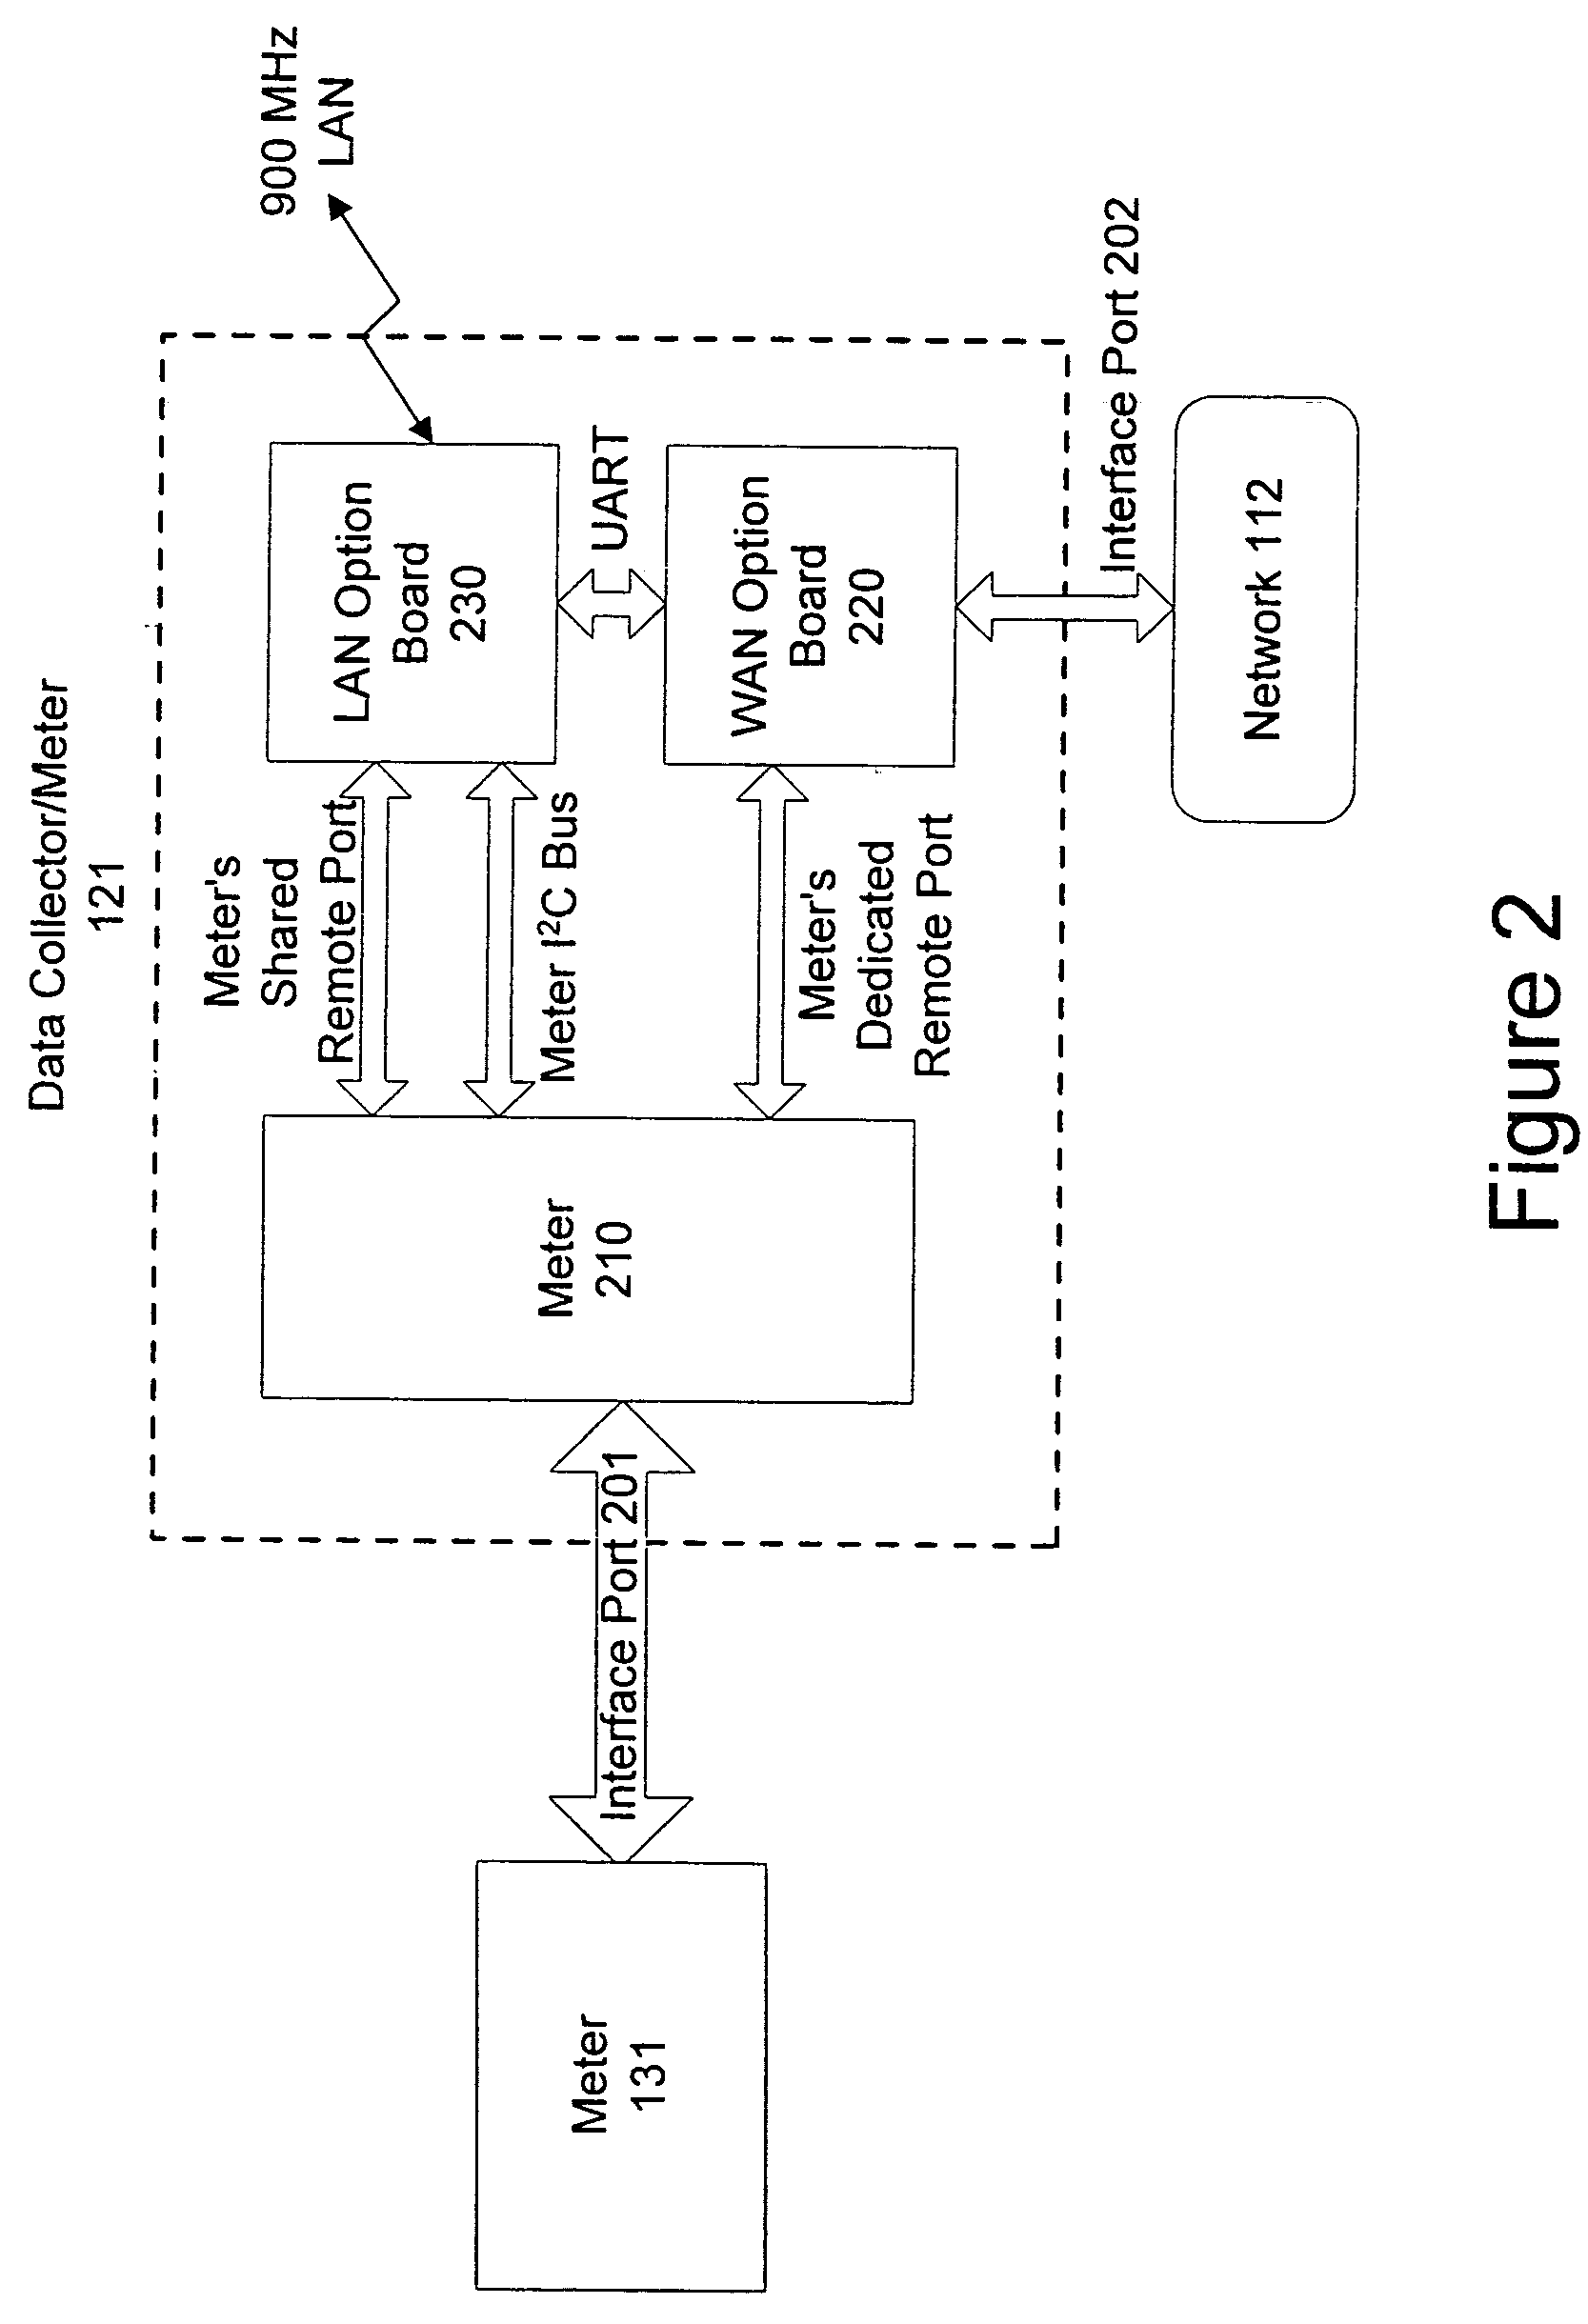 Data collector for an automated meter reading system